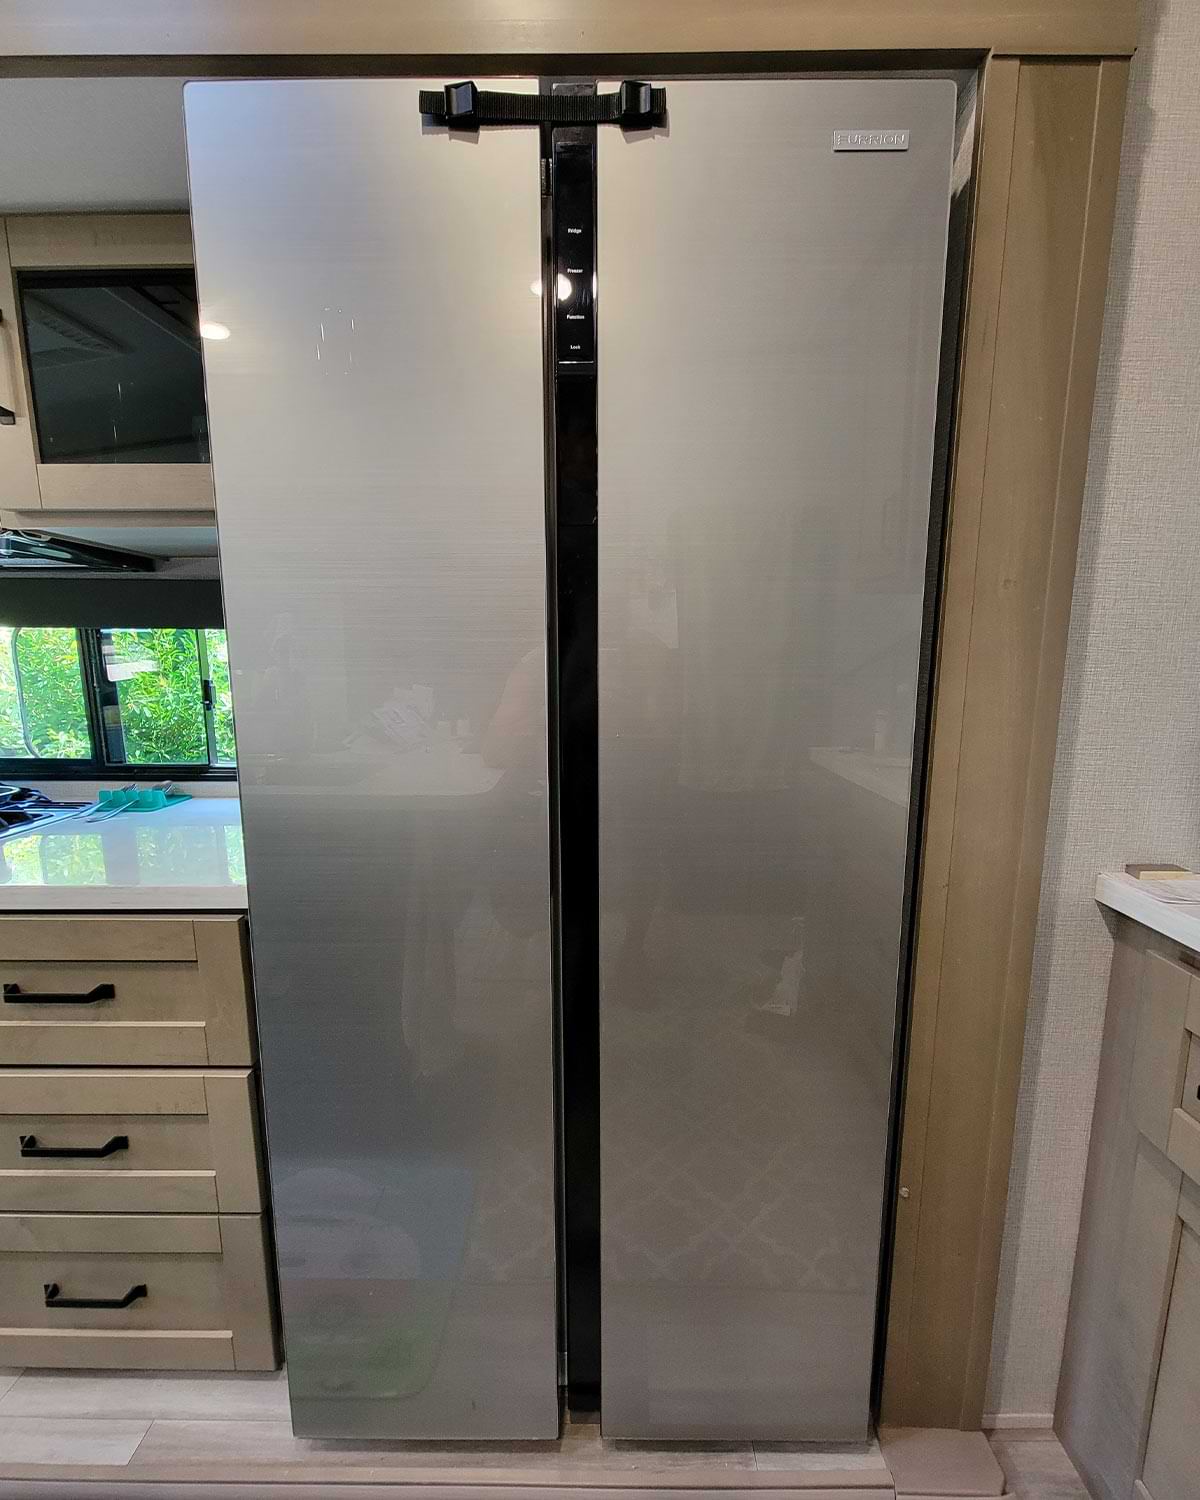 full front view of a RV refrigerator with a factory installed latch attached at the top of both doors